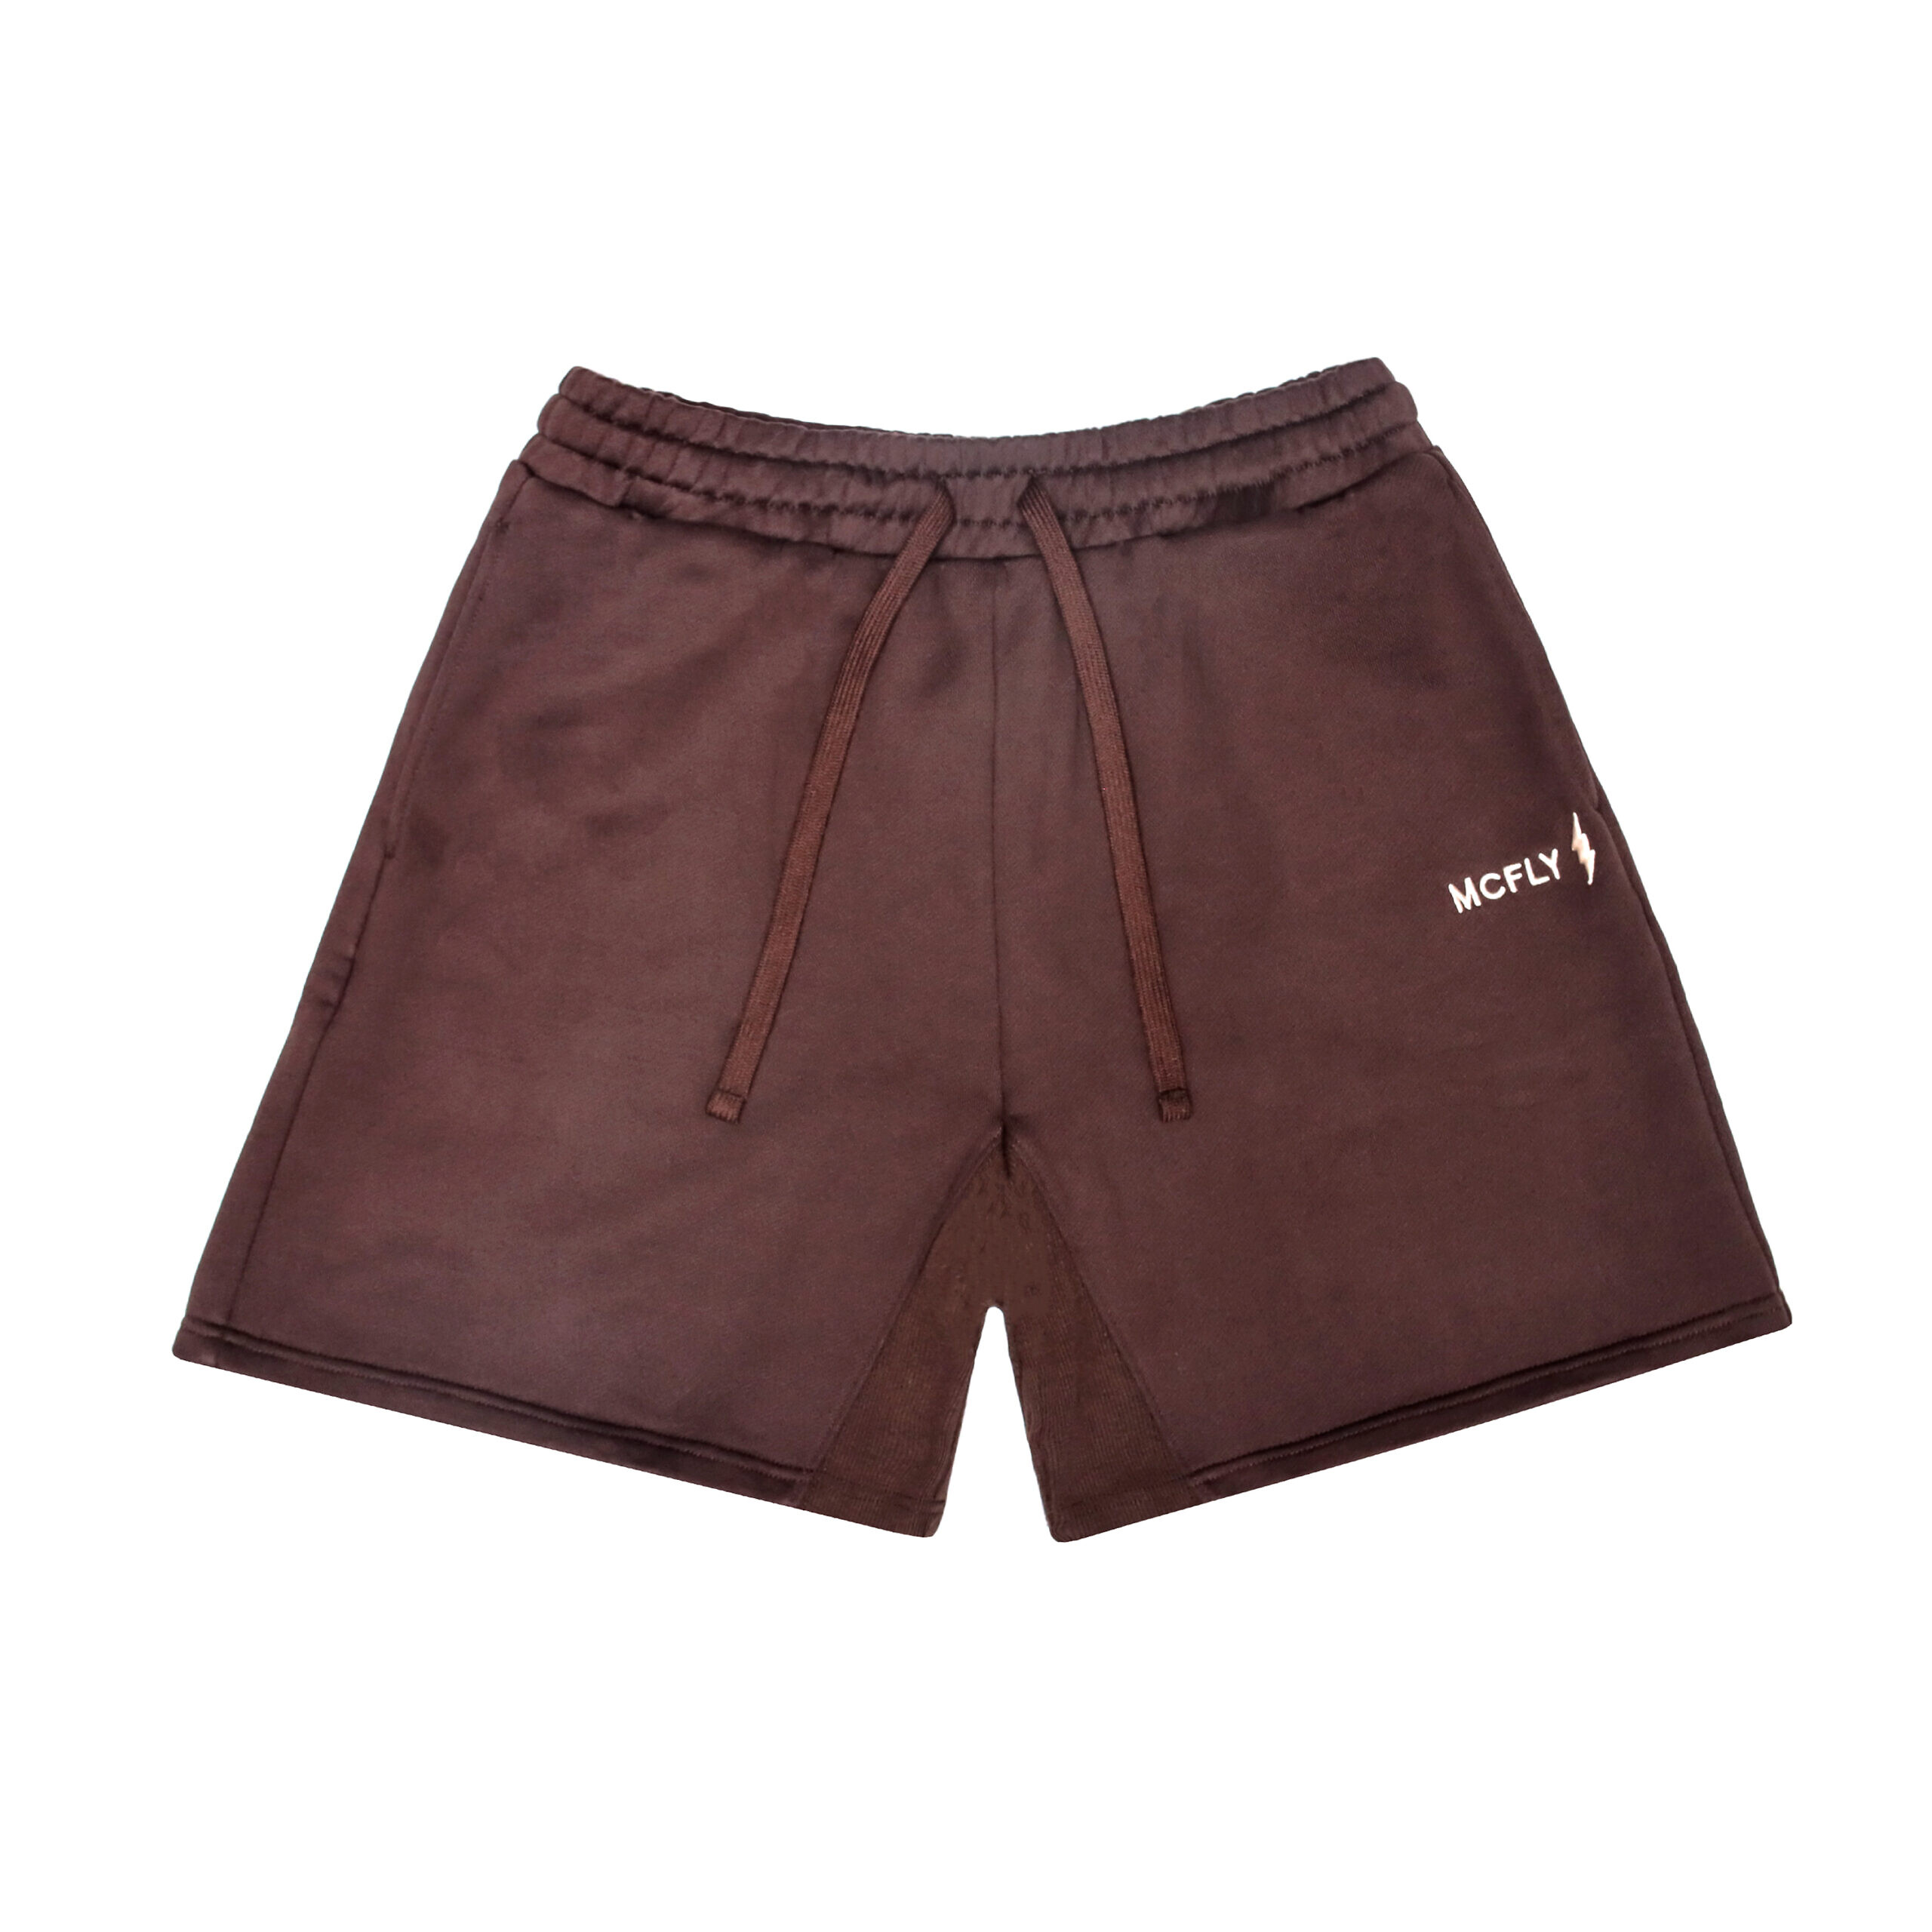 MCFLY French Terry Shorts